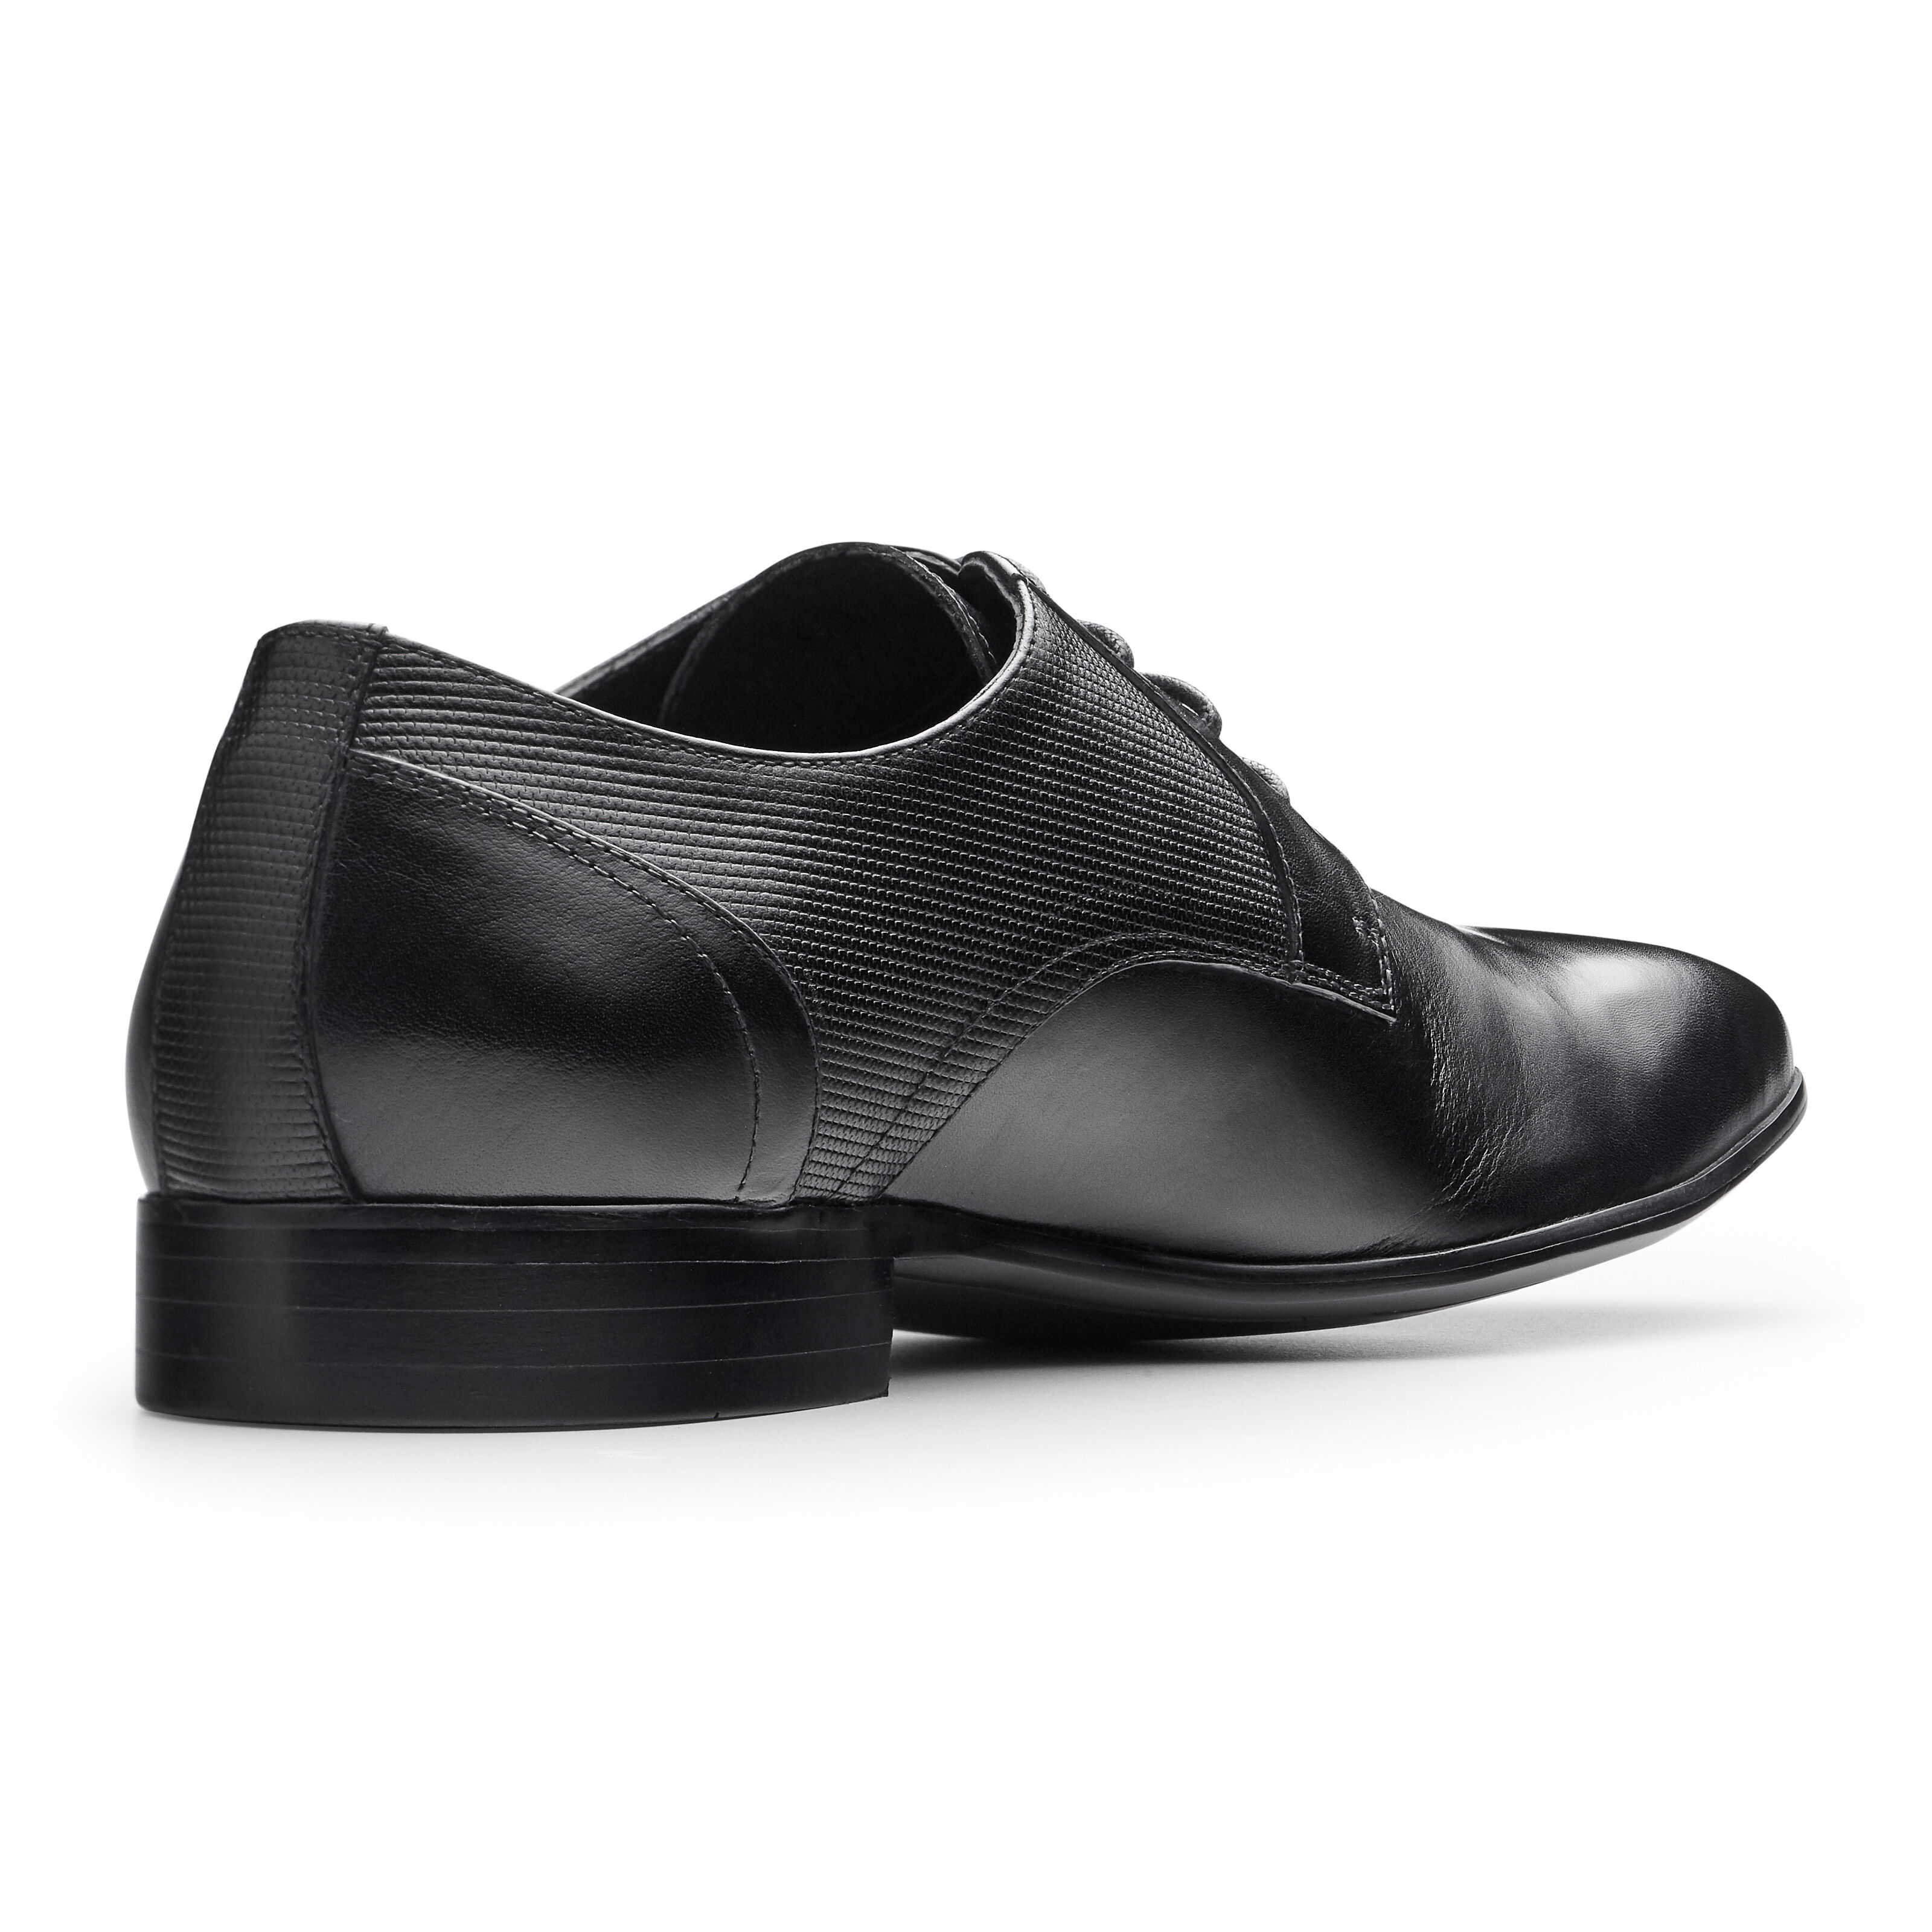 Leather Lace Up Formal Dress Shoes 